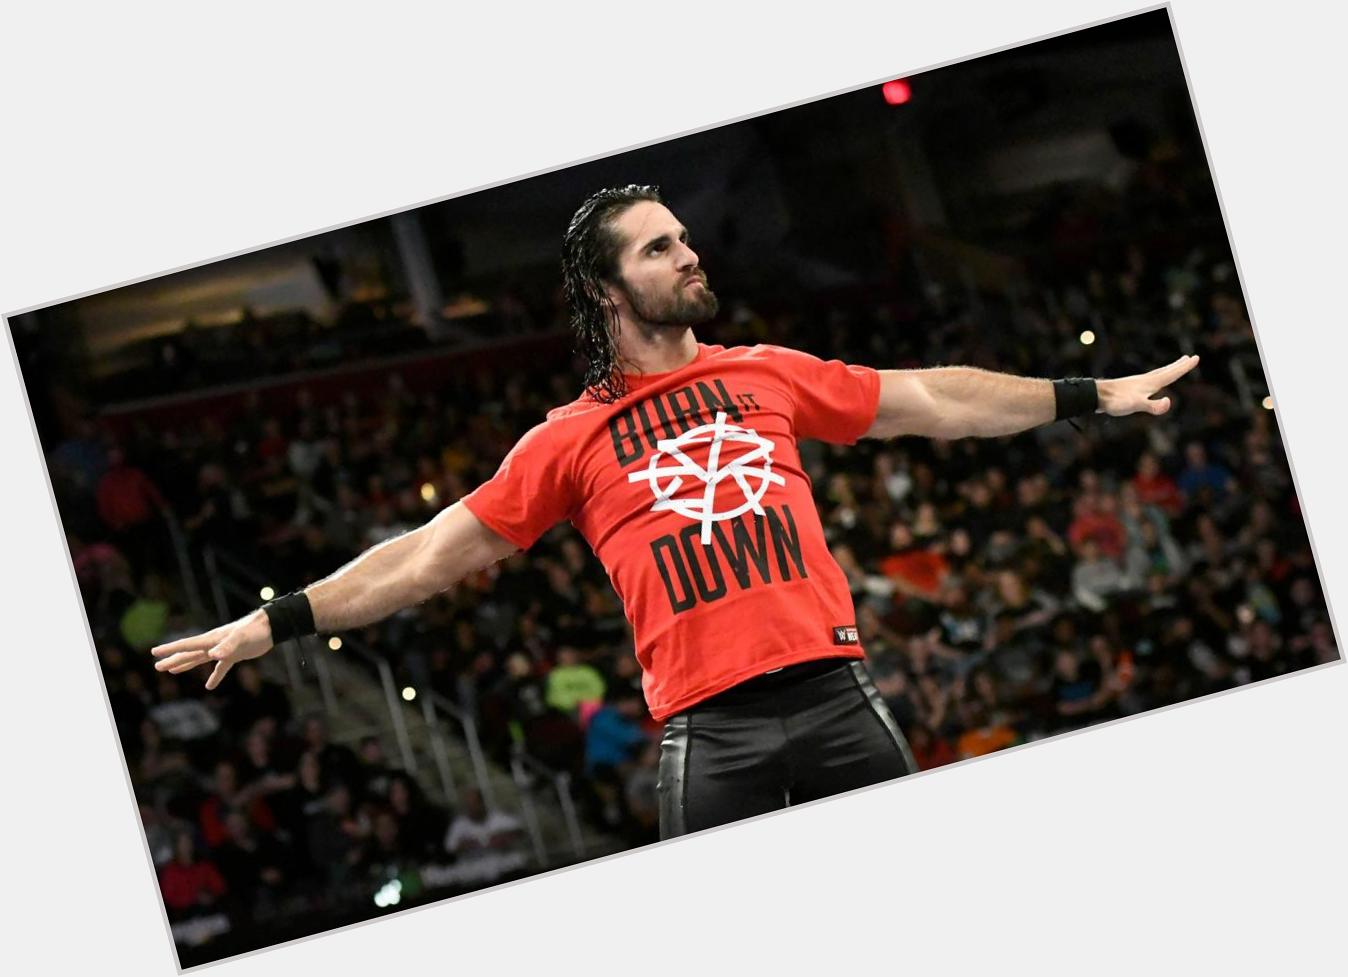 Happy Birthday to Seth Rollins who turns 32 today! 